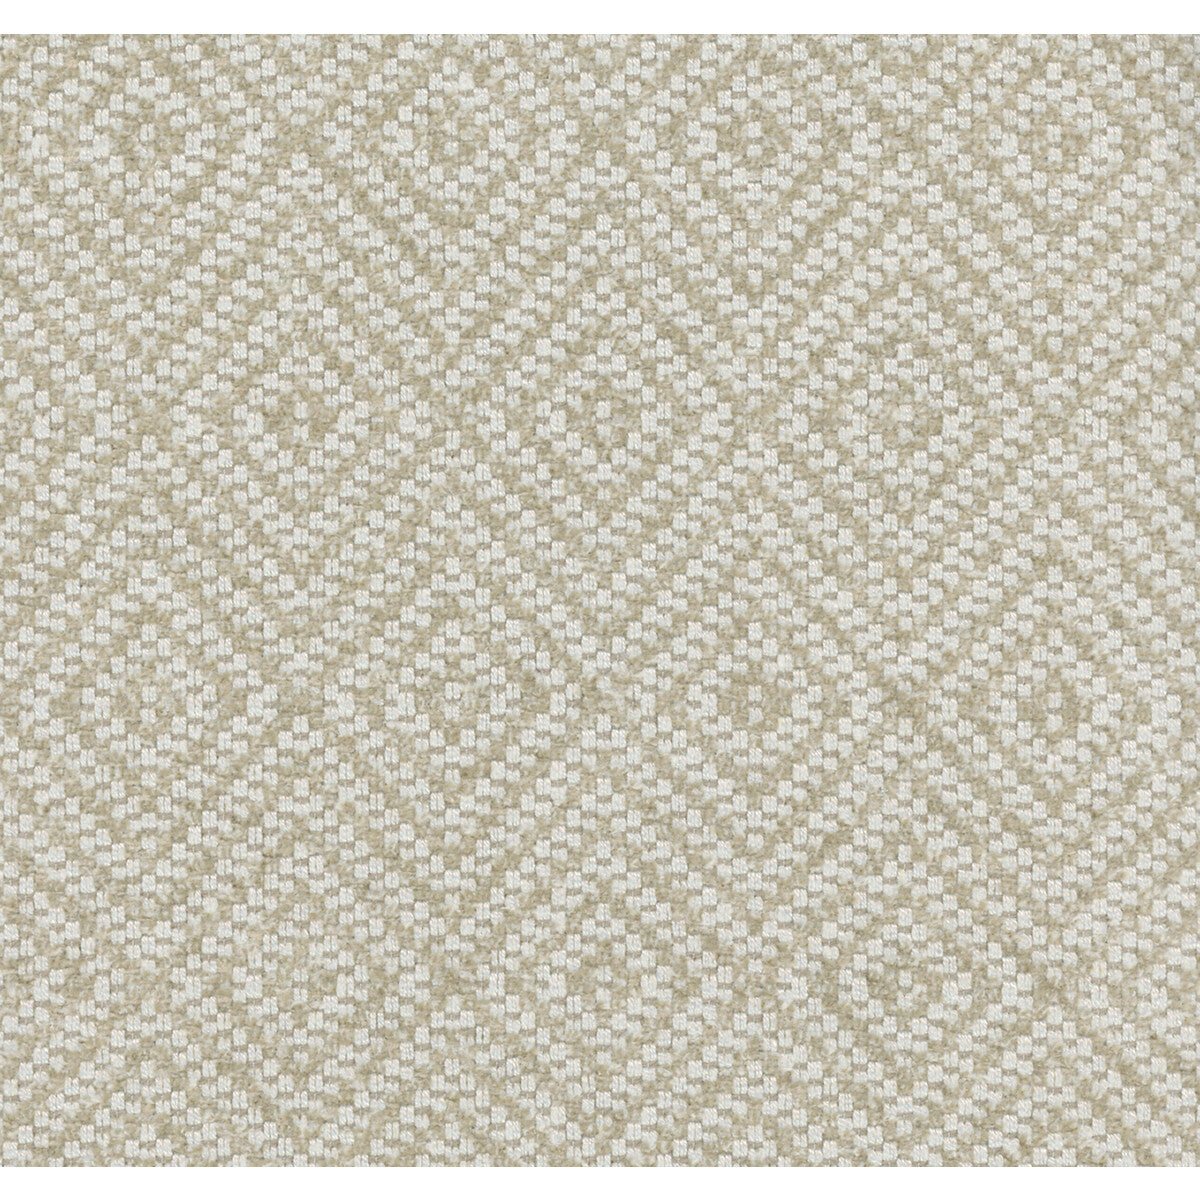 Focal Point fabric in stone color - pattern 34399.16.0 - by Kravet Couture